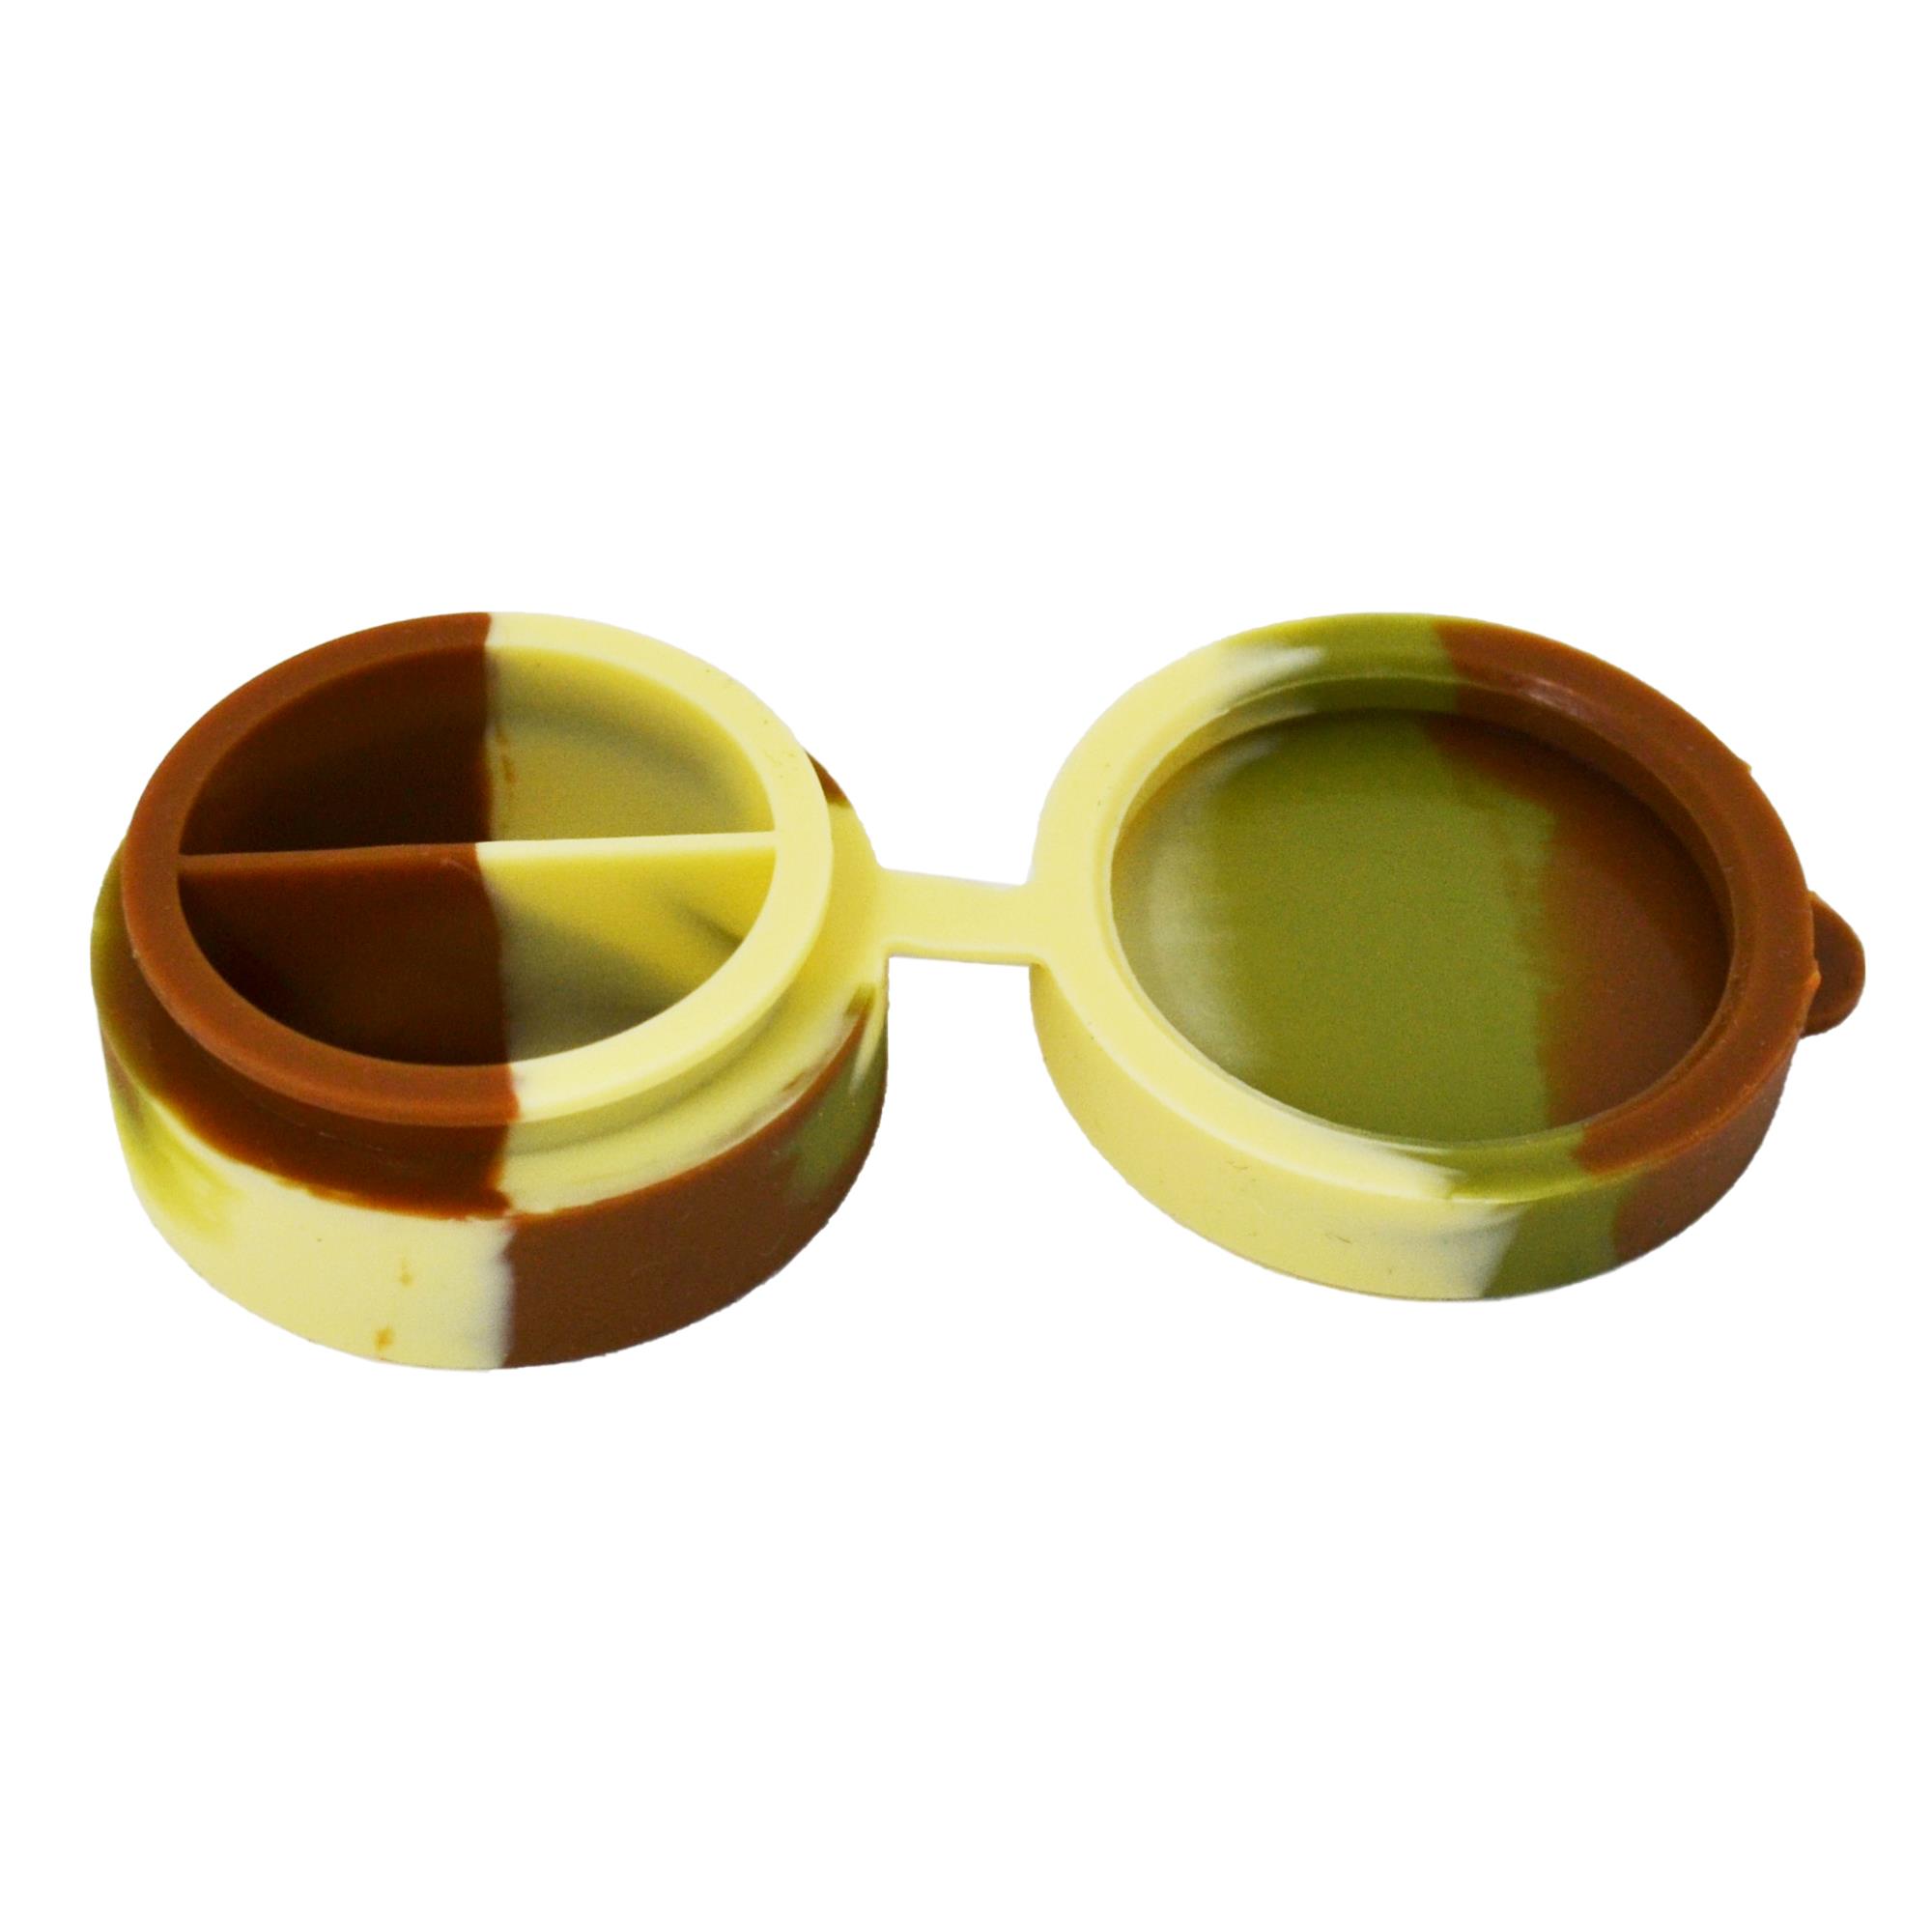 SILICONE CONTAINER - DUAL COMPARTMENT - 43MM